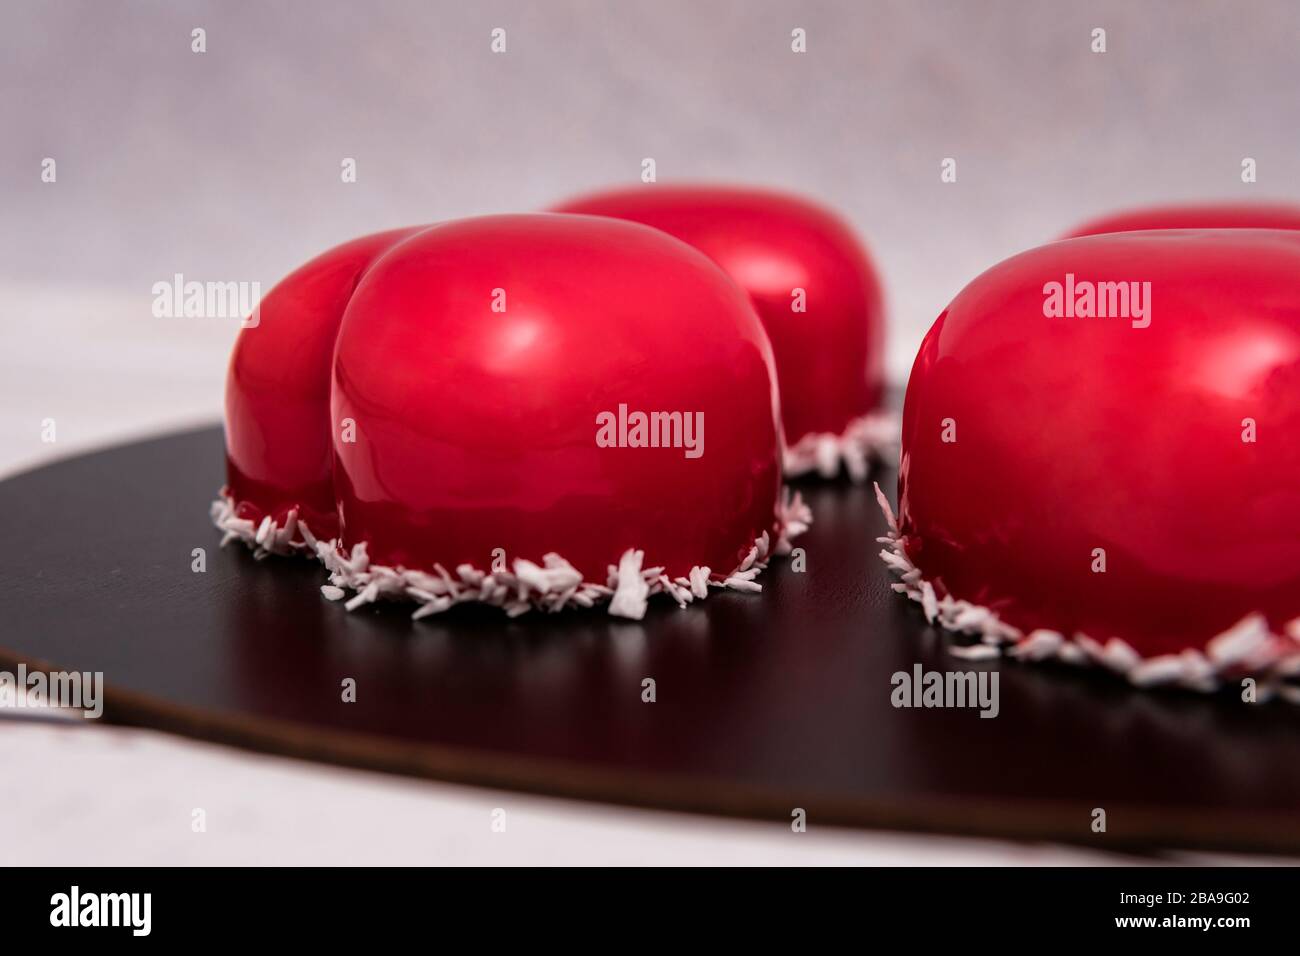 Close-up of mousse cake with red mirror glaze. Cooking french dessert. Frozen mirror icing on the cake. Baking and confectionery concept. Stock Photo